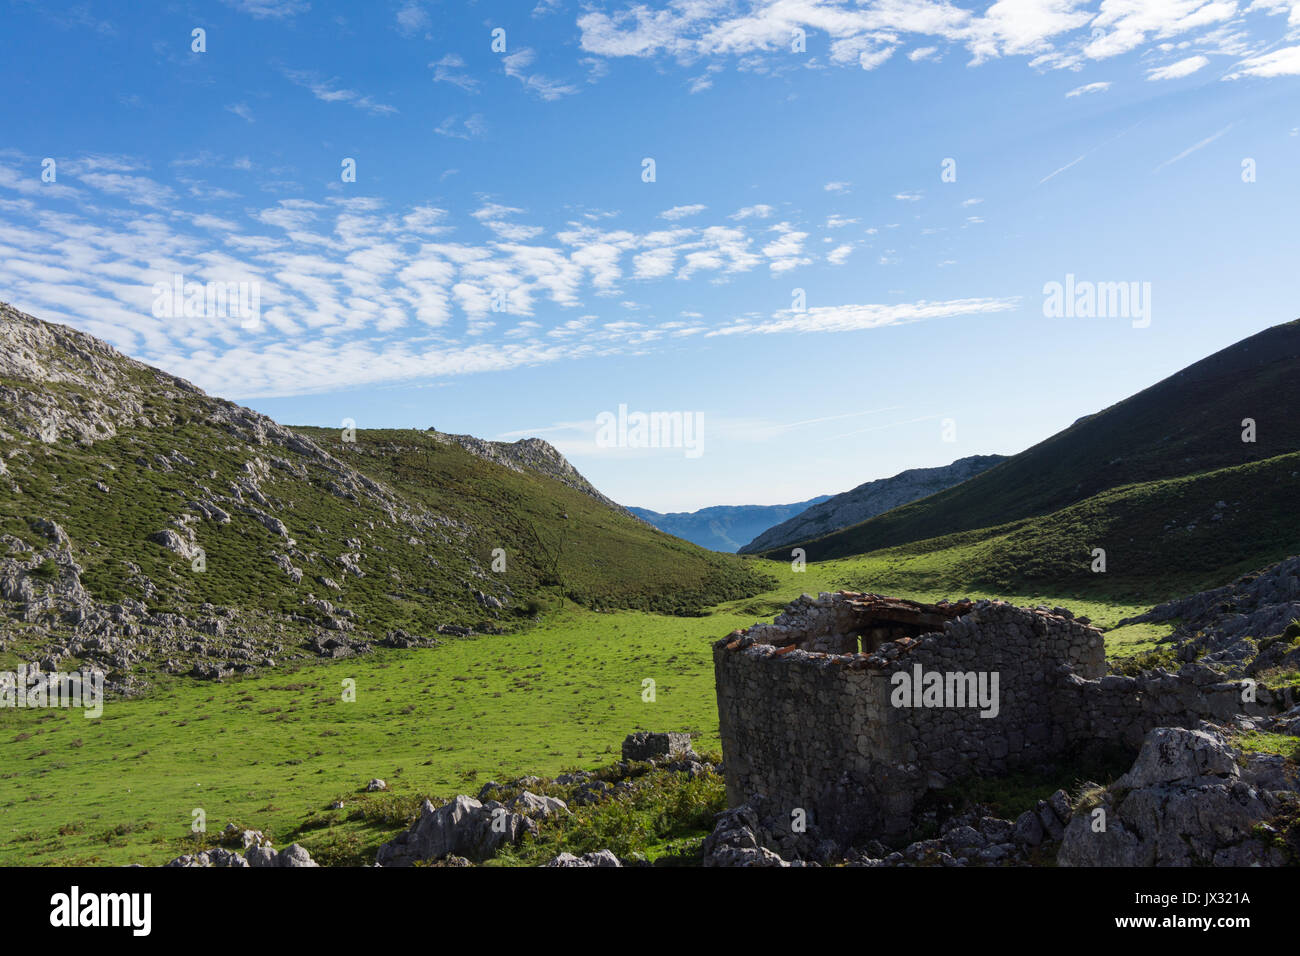 Derelict buildings and old mountain homesteads in a high pasture in the picos de europa mountians.  Brañarredonda. Stock Photo